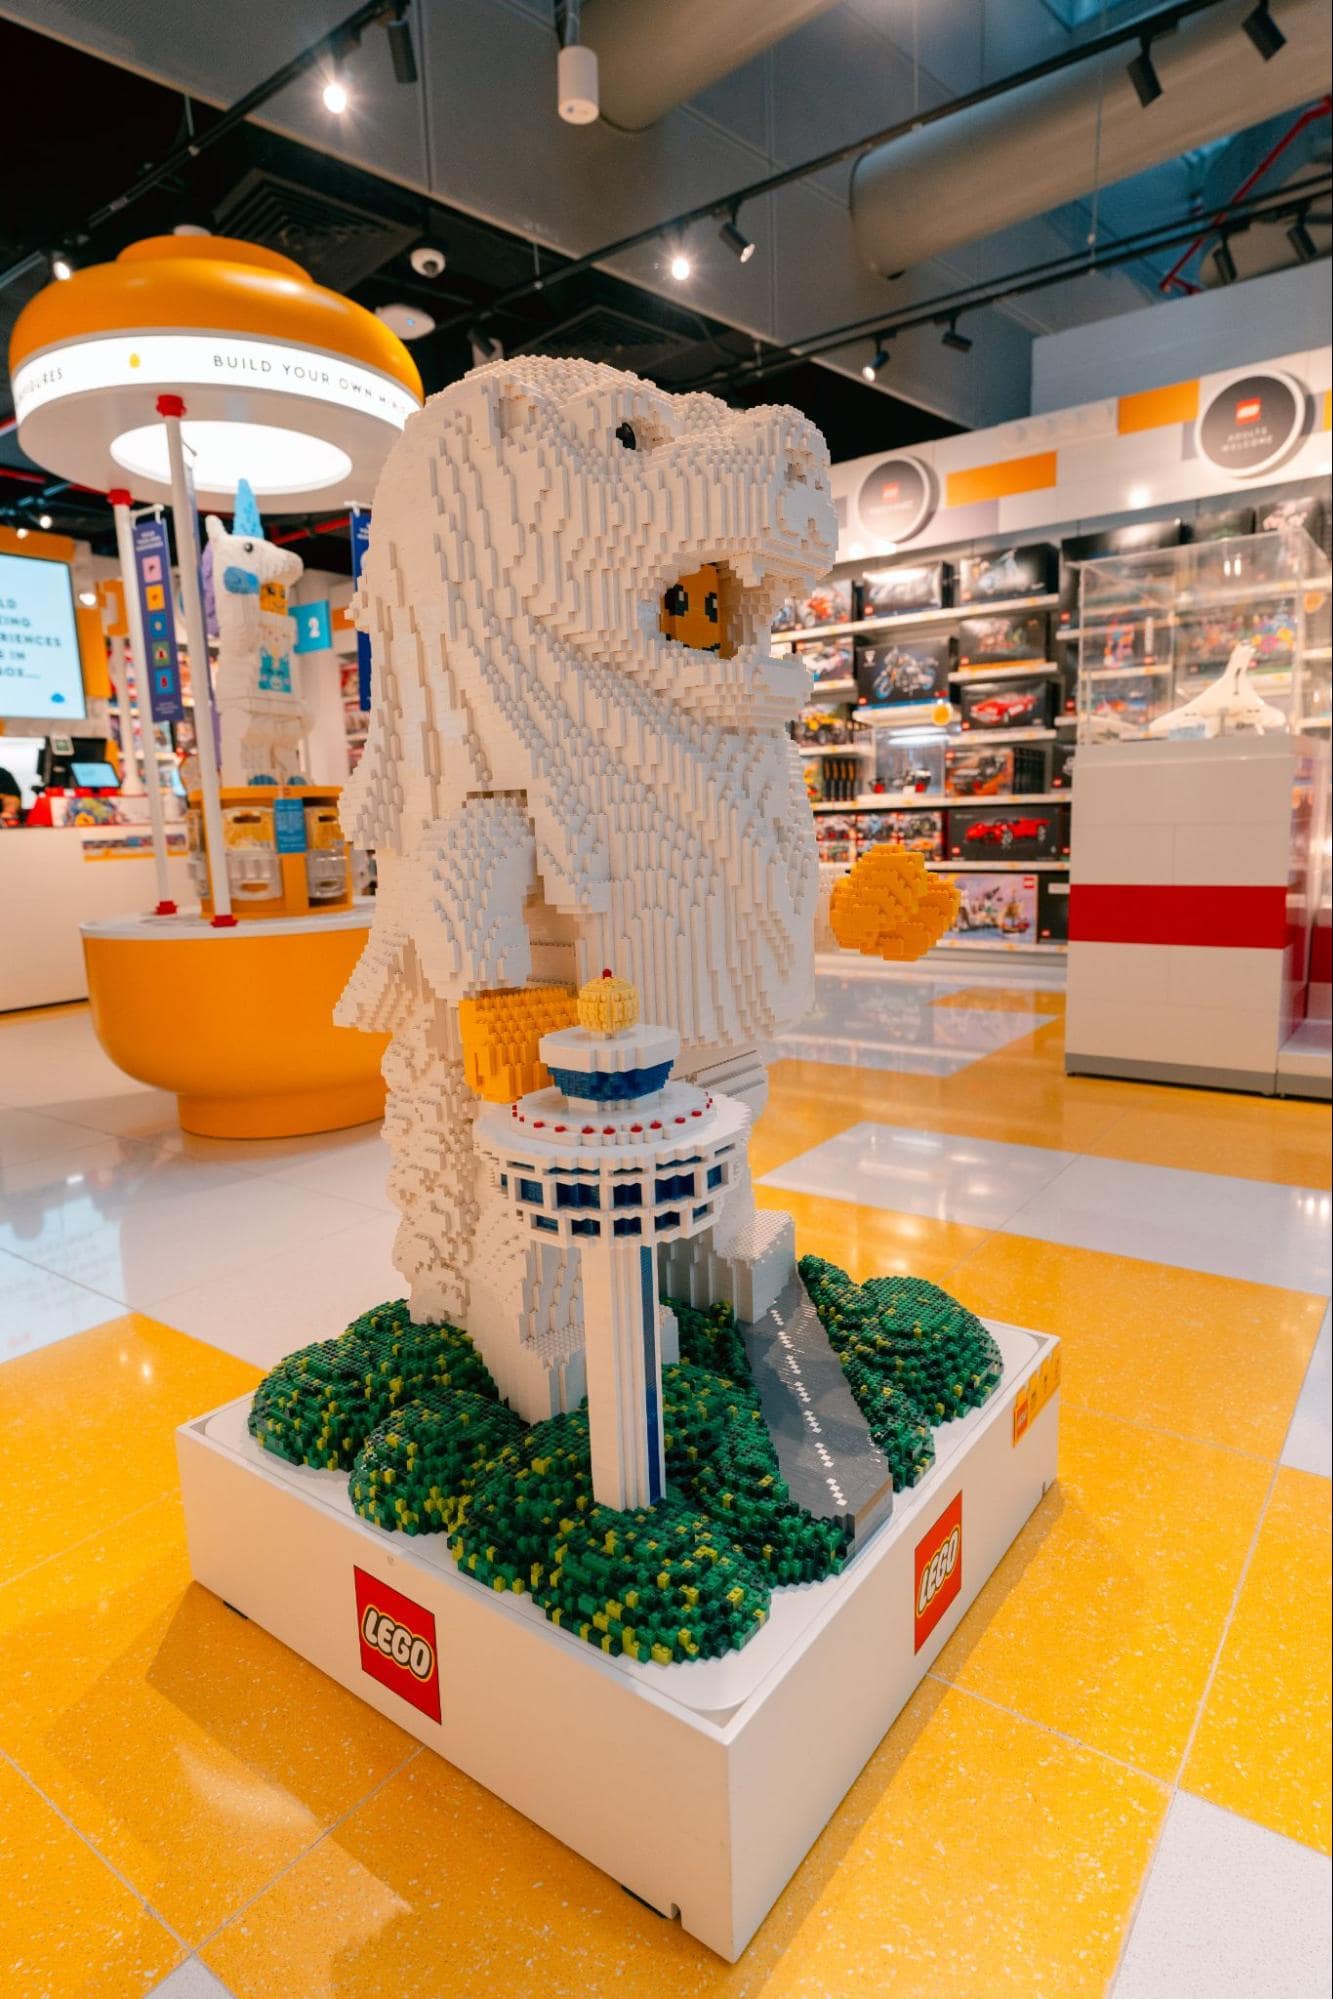 Merlion Model At LEGO Airport Store